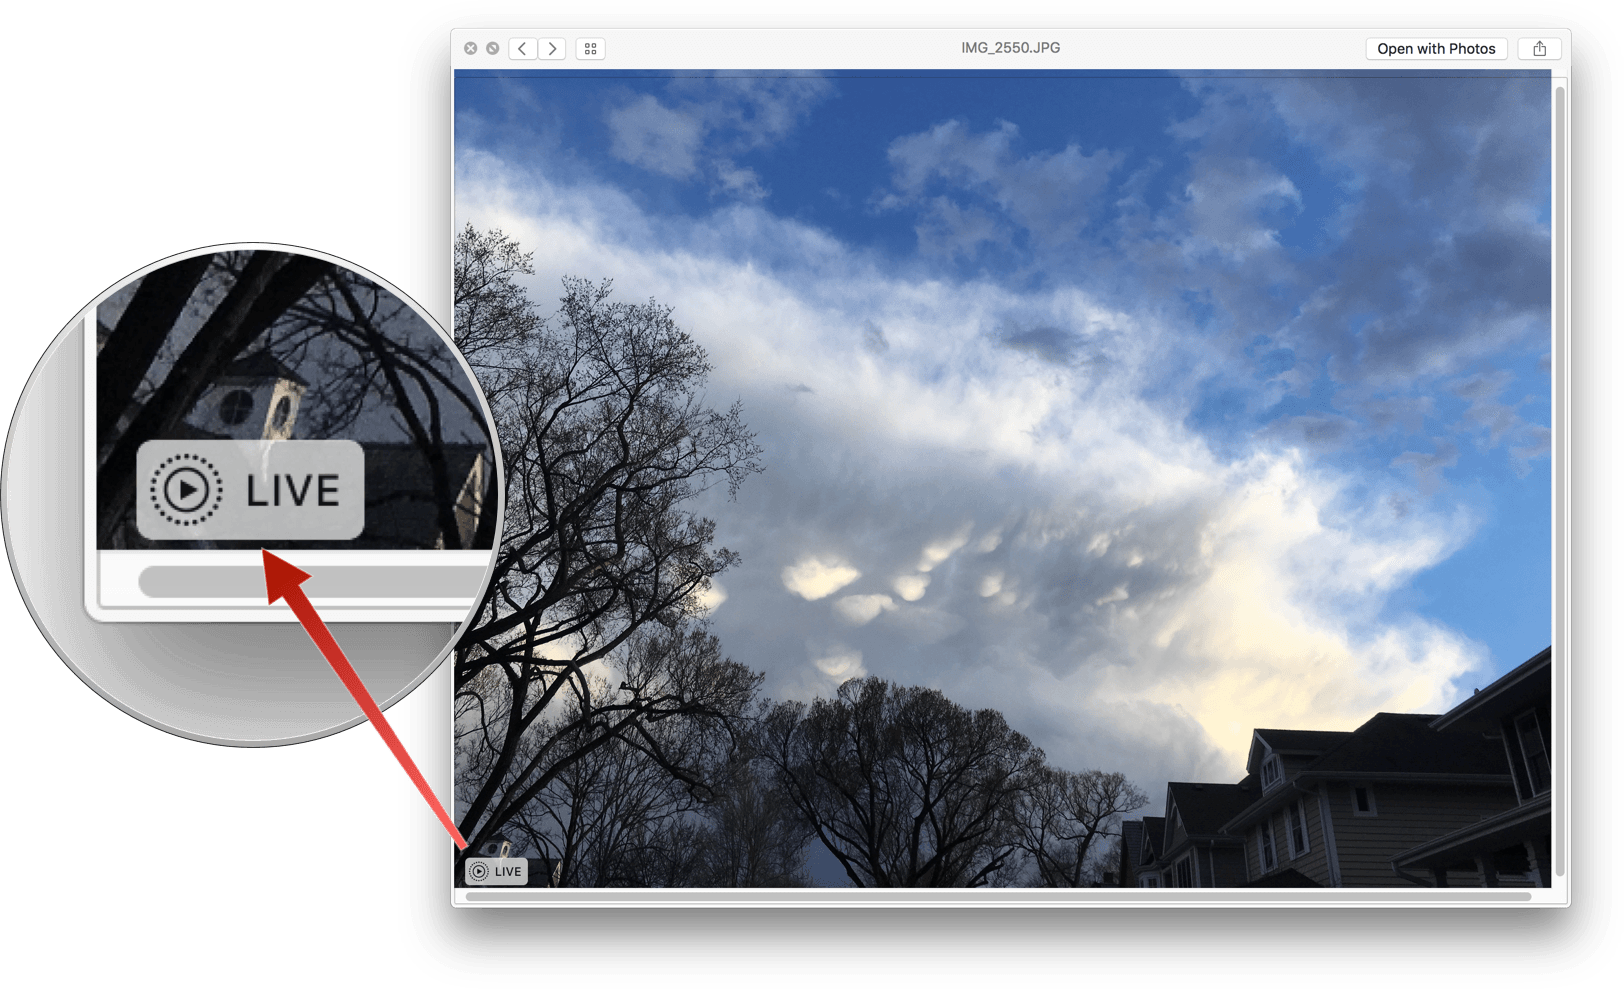 Live Photos play automatically when previewed.